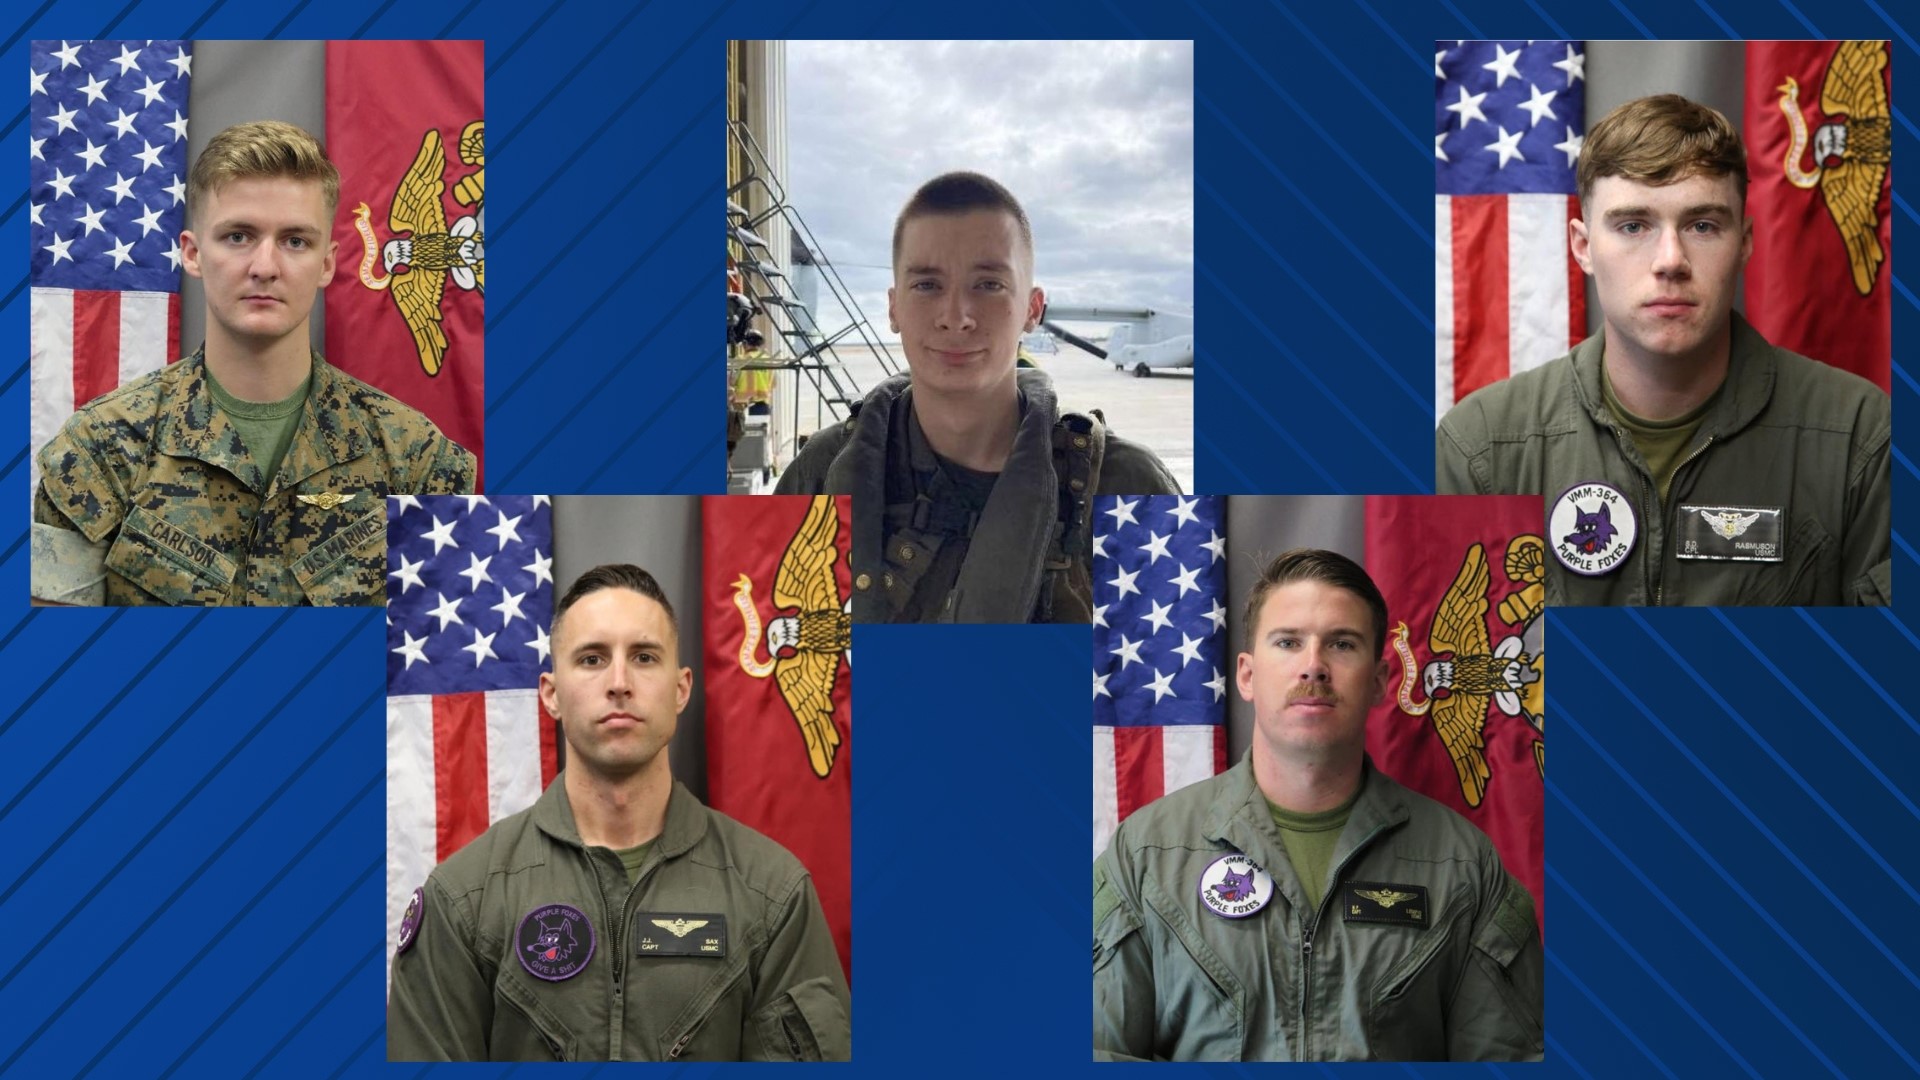 The five Marines died when their Osprey aircraft crashed during training on Wednesday afternoon near Glamis in Imperial County.